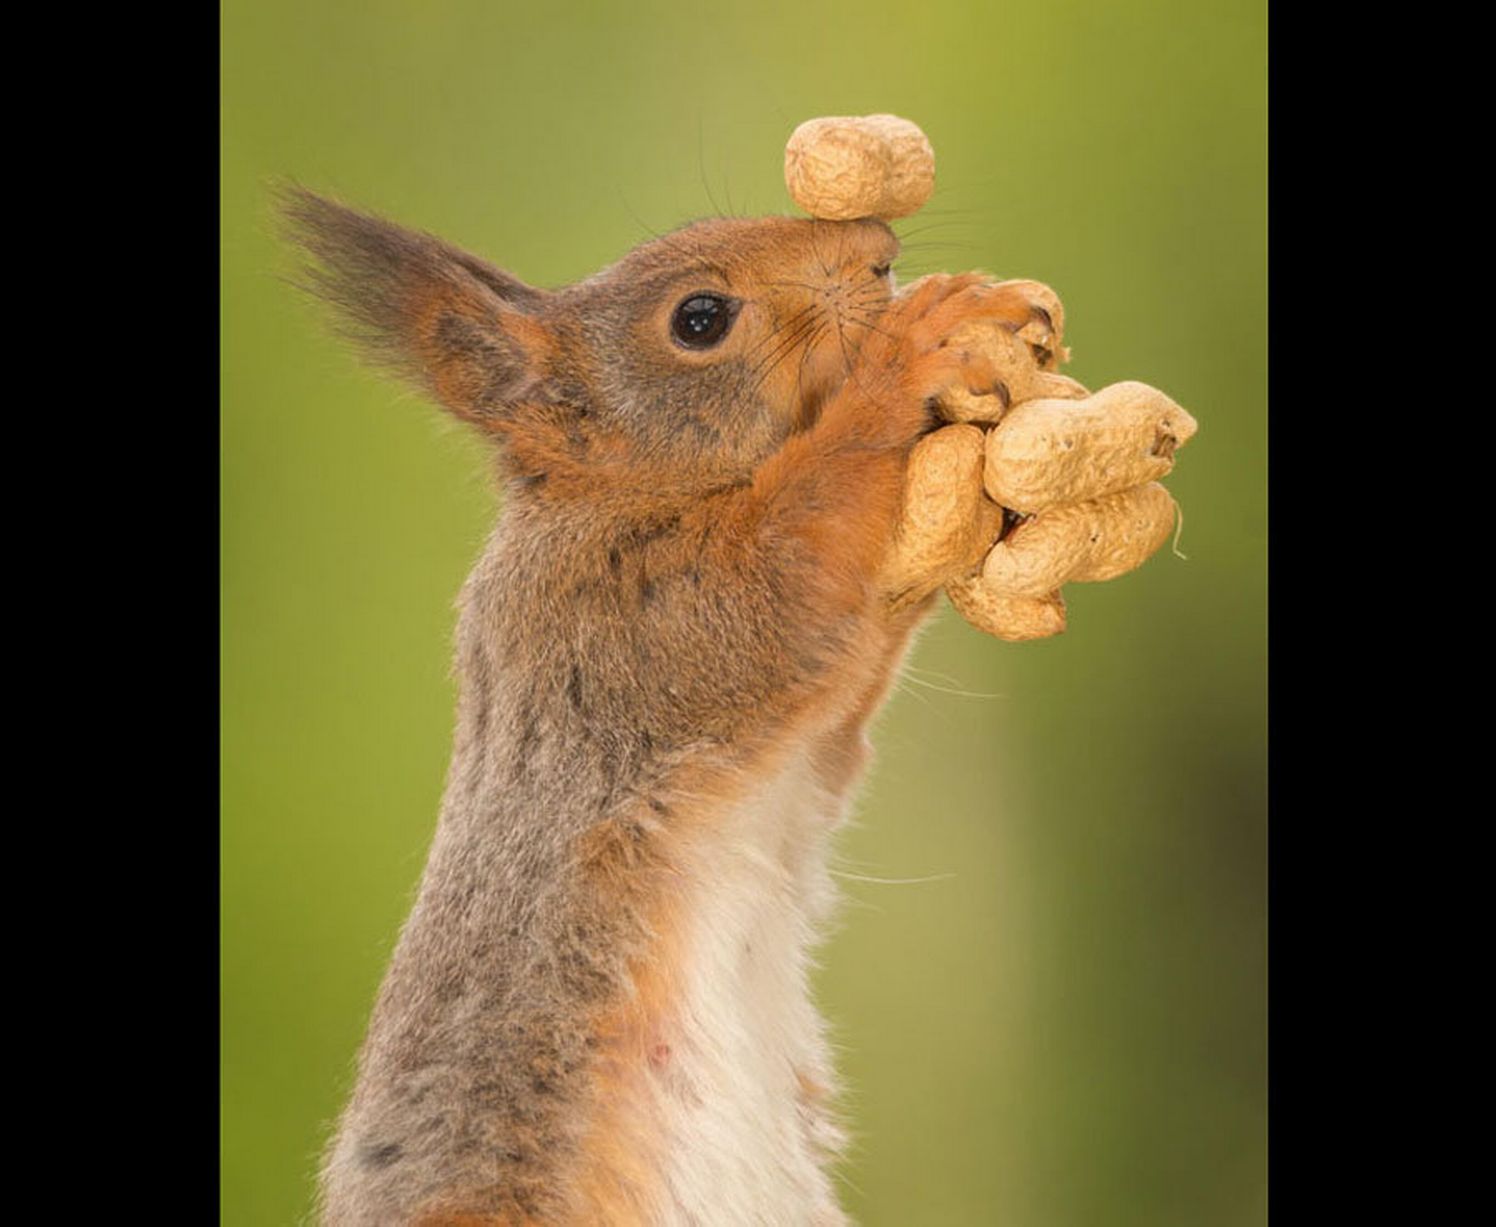 A greedy red squirrel tries to carry so many nuts at once that he has to balance one on his nose